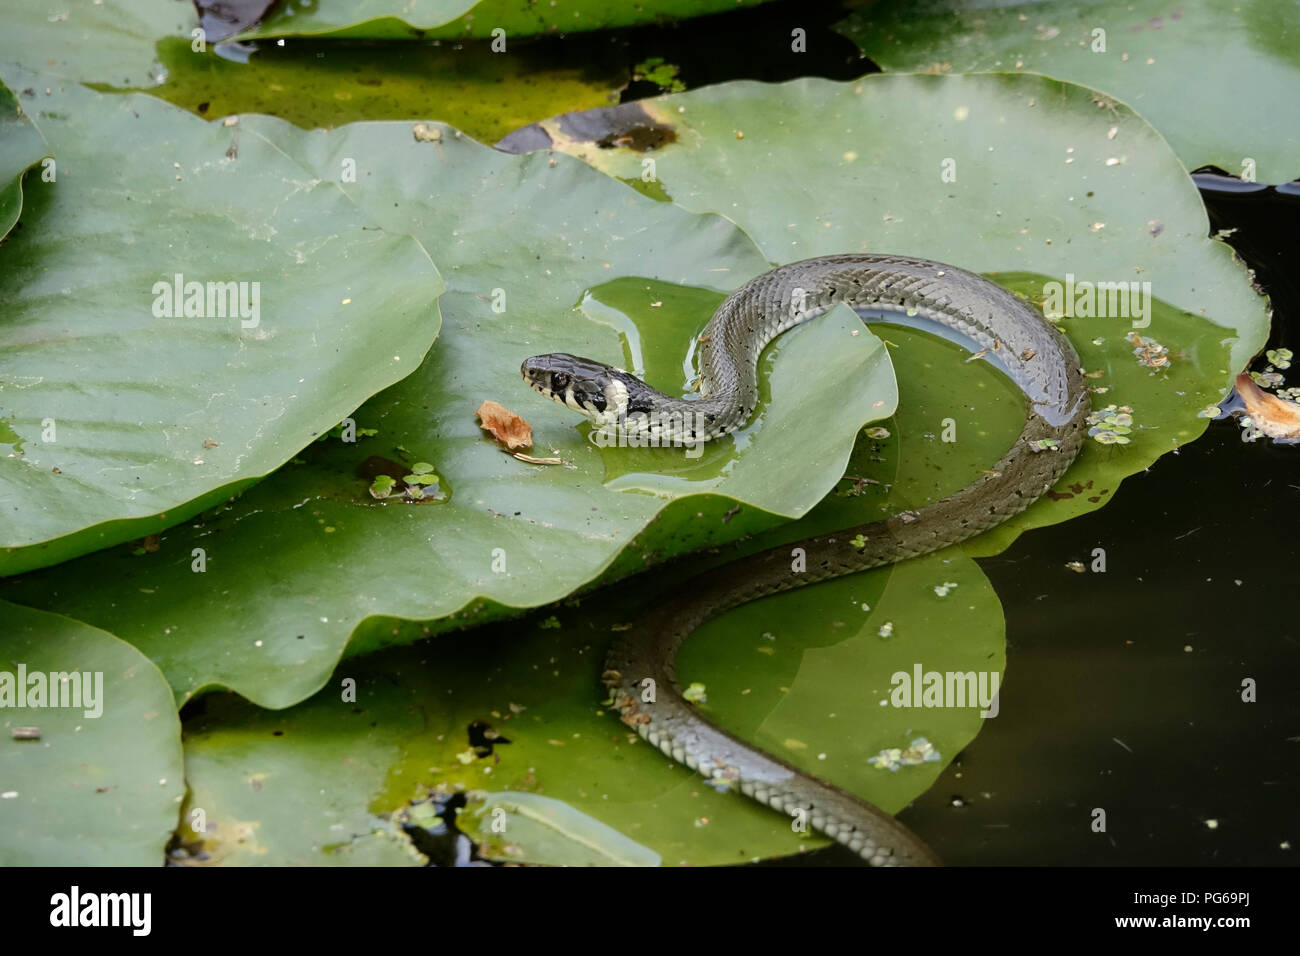 Slithering Grass Snake on lily pads in a pond Stock Photo